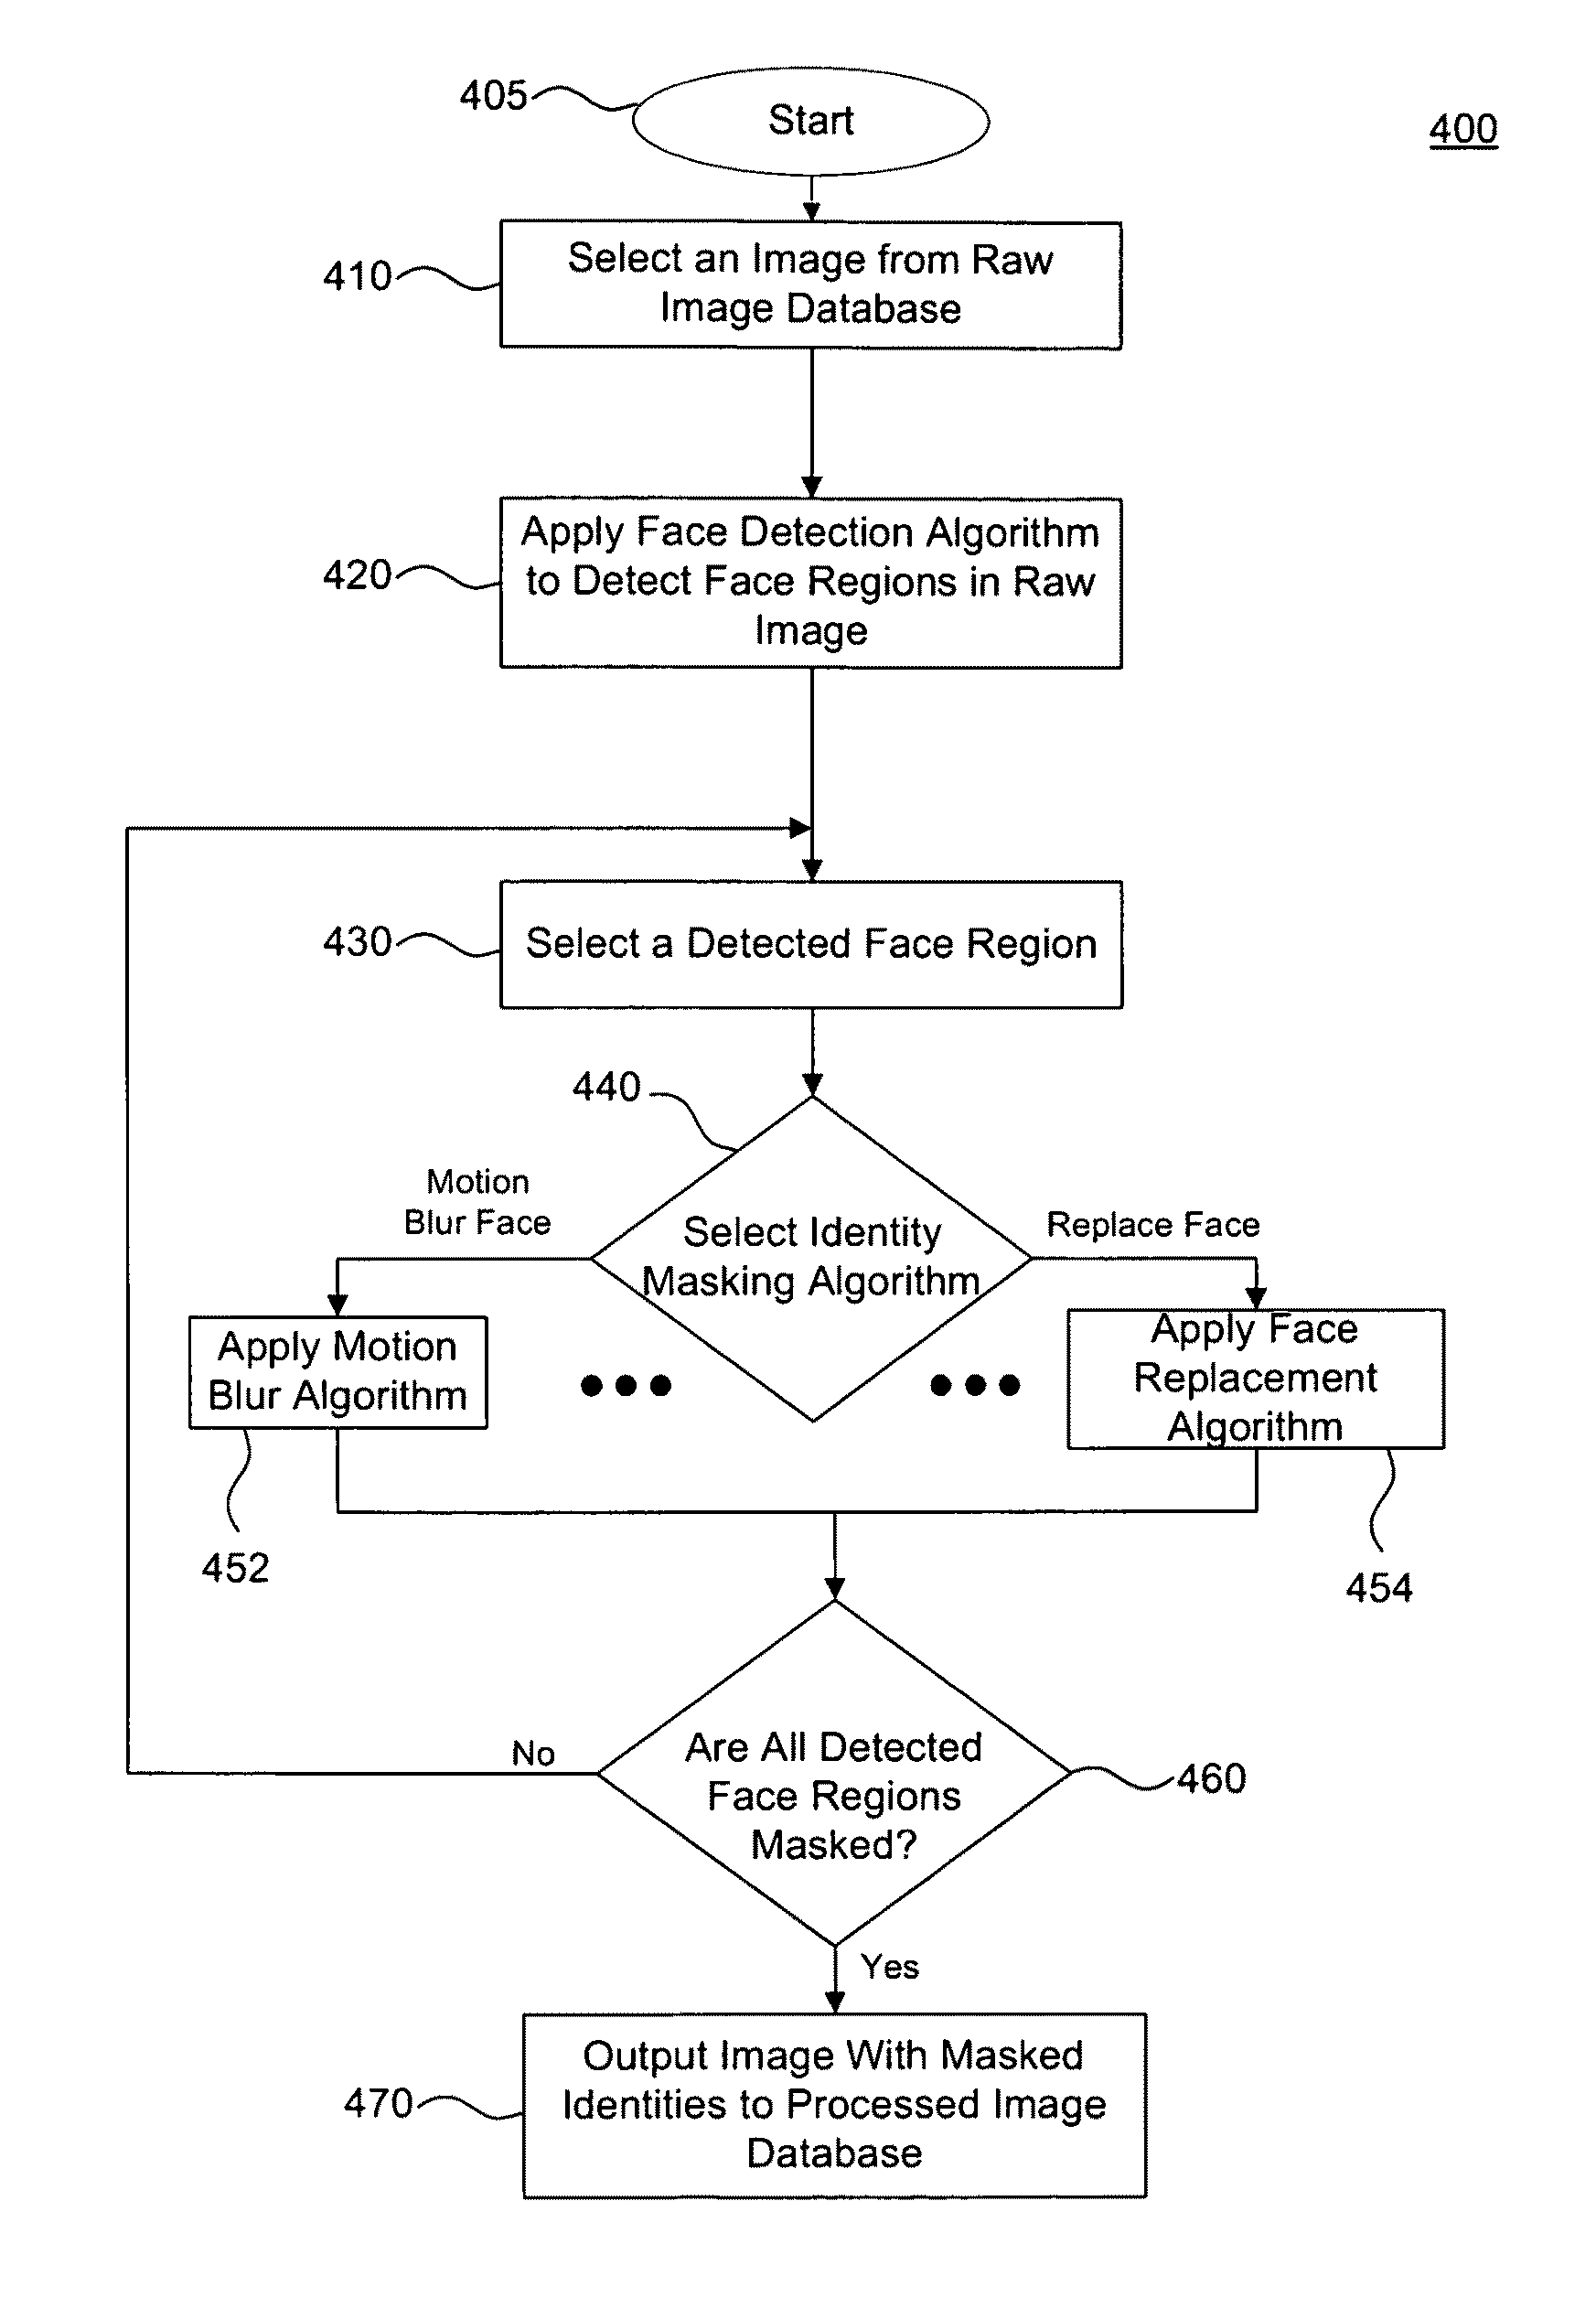 Automatic face detection and identity masking in images, and applications thereof